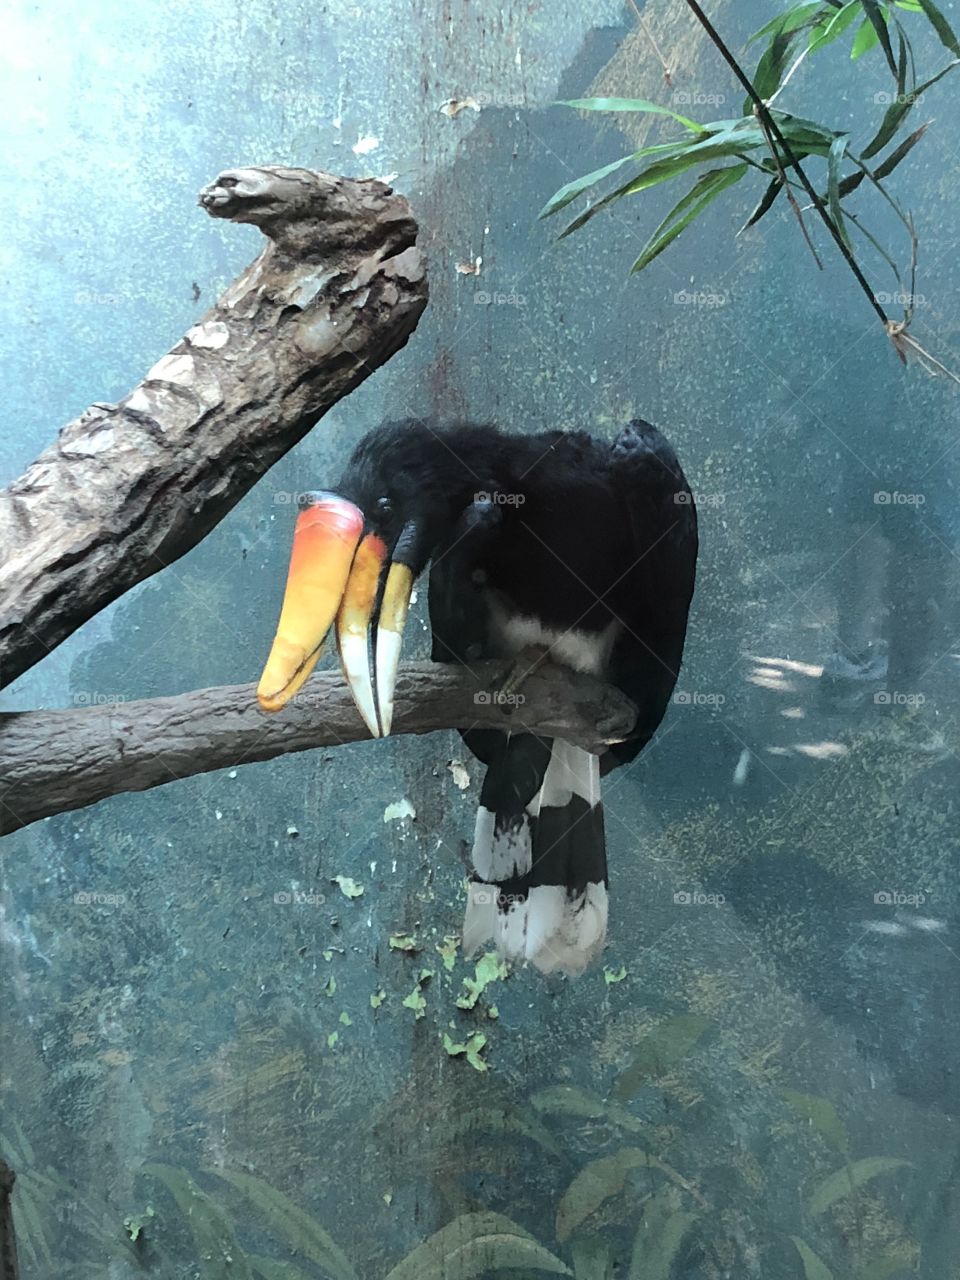 A photo of a large bird taken at an aviary.